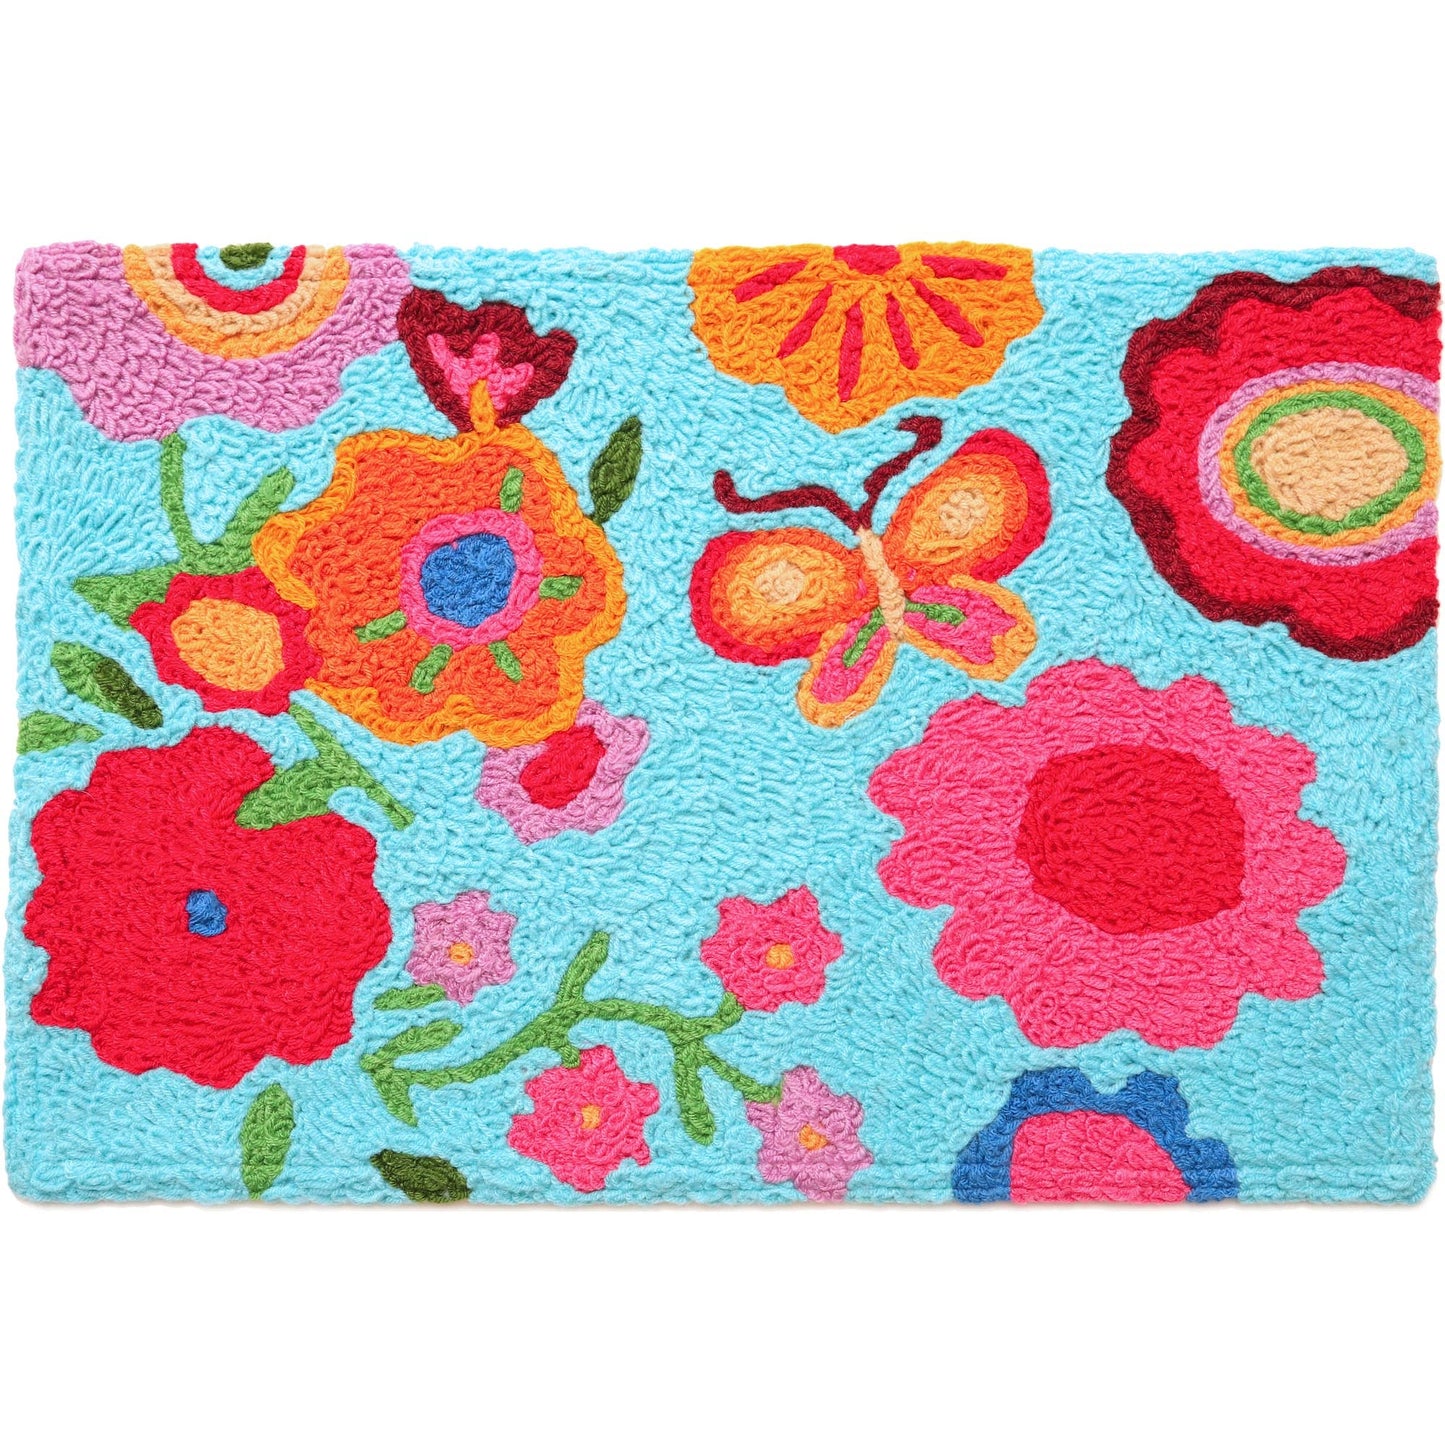 Jellybean Accent Rug - Watercolor Flowers and Butterfly Home Decor Jellybean   